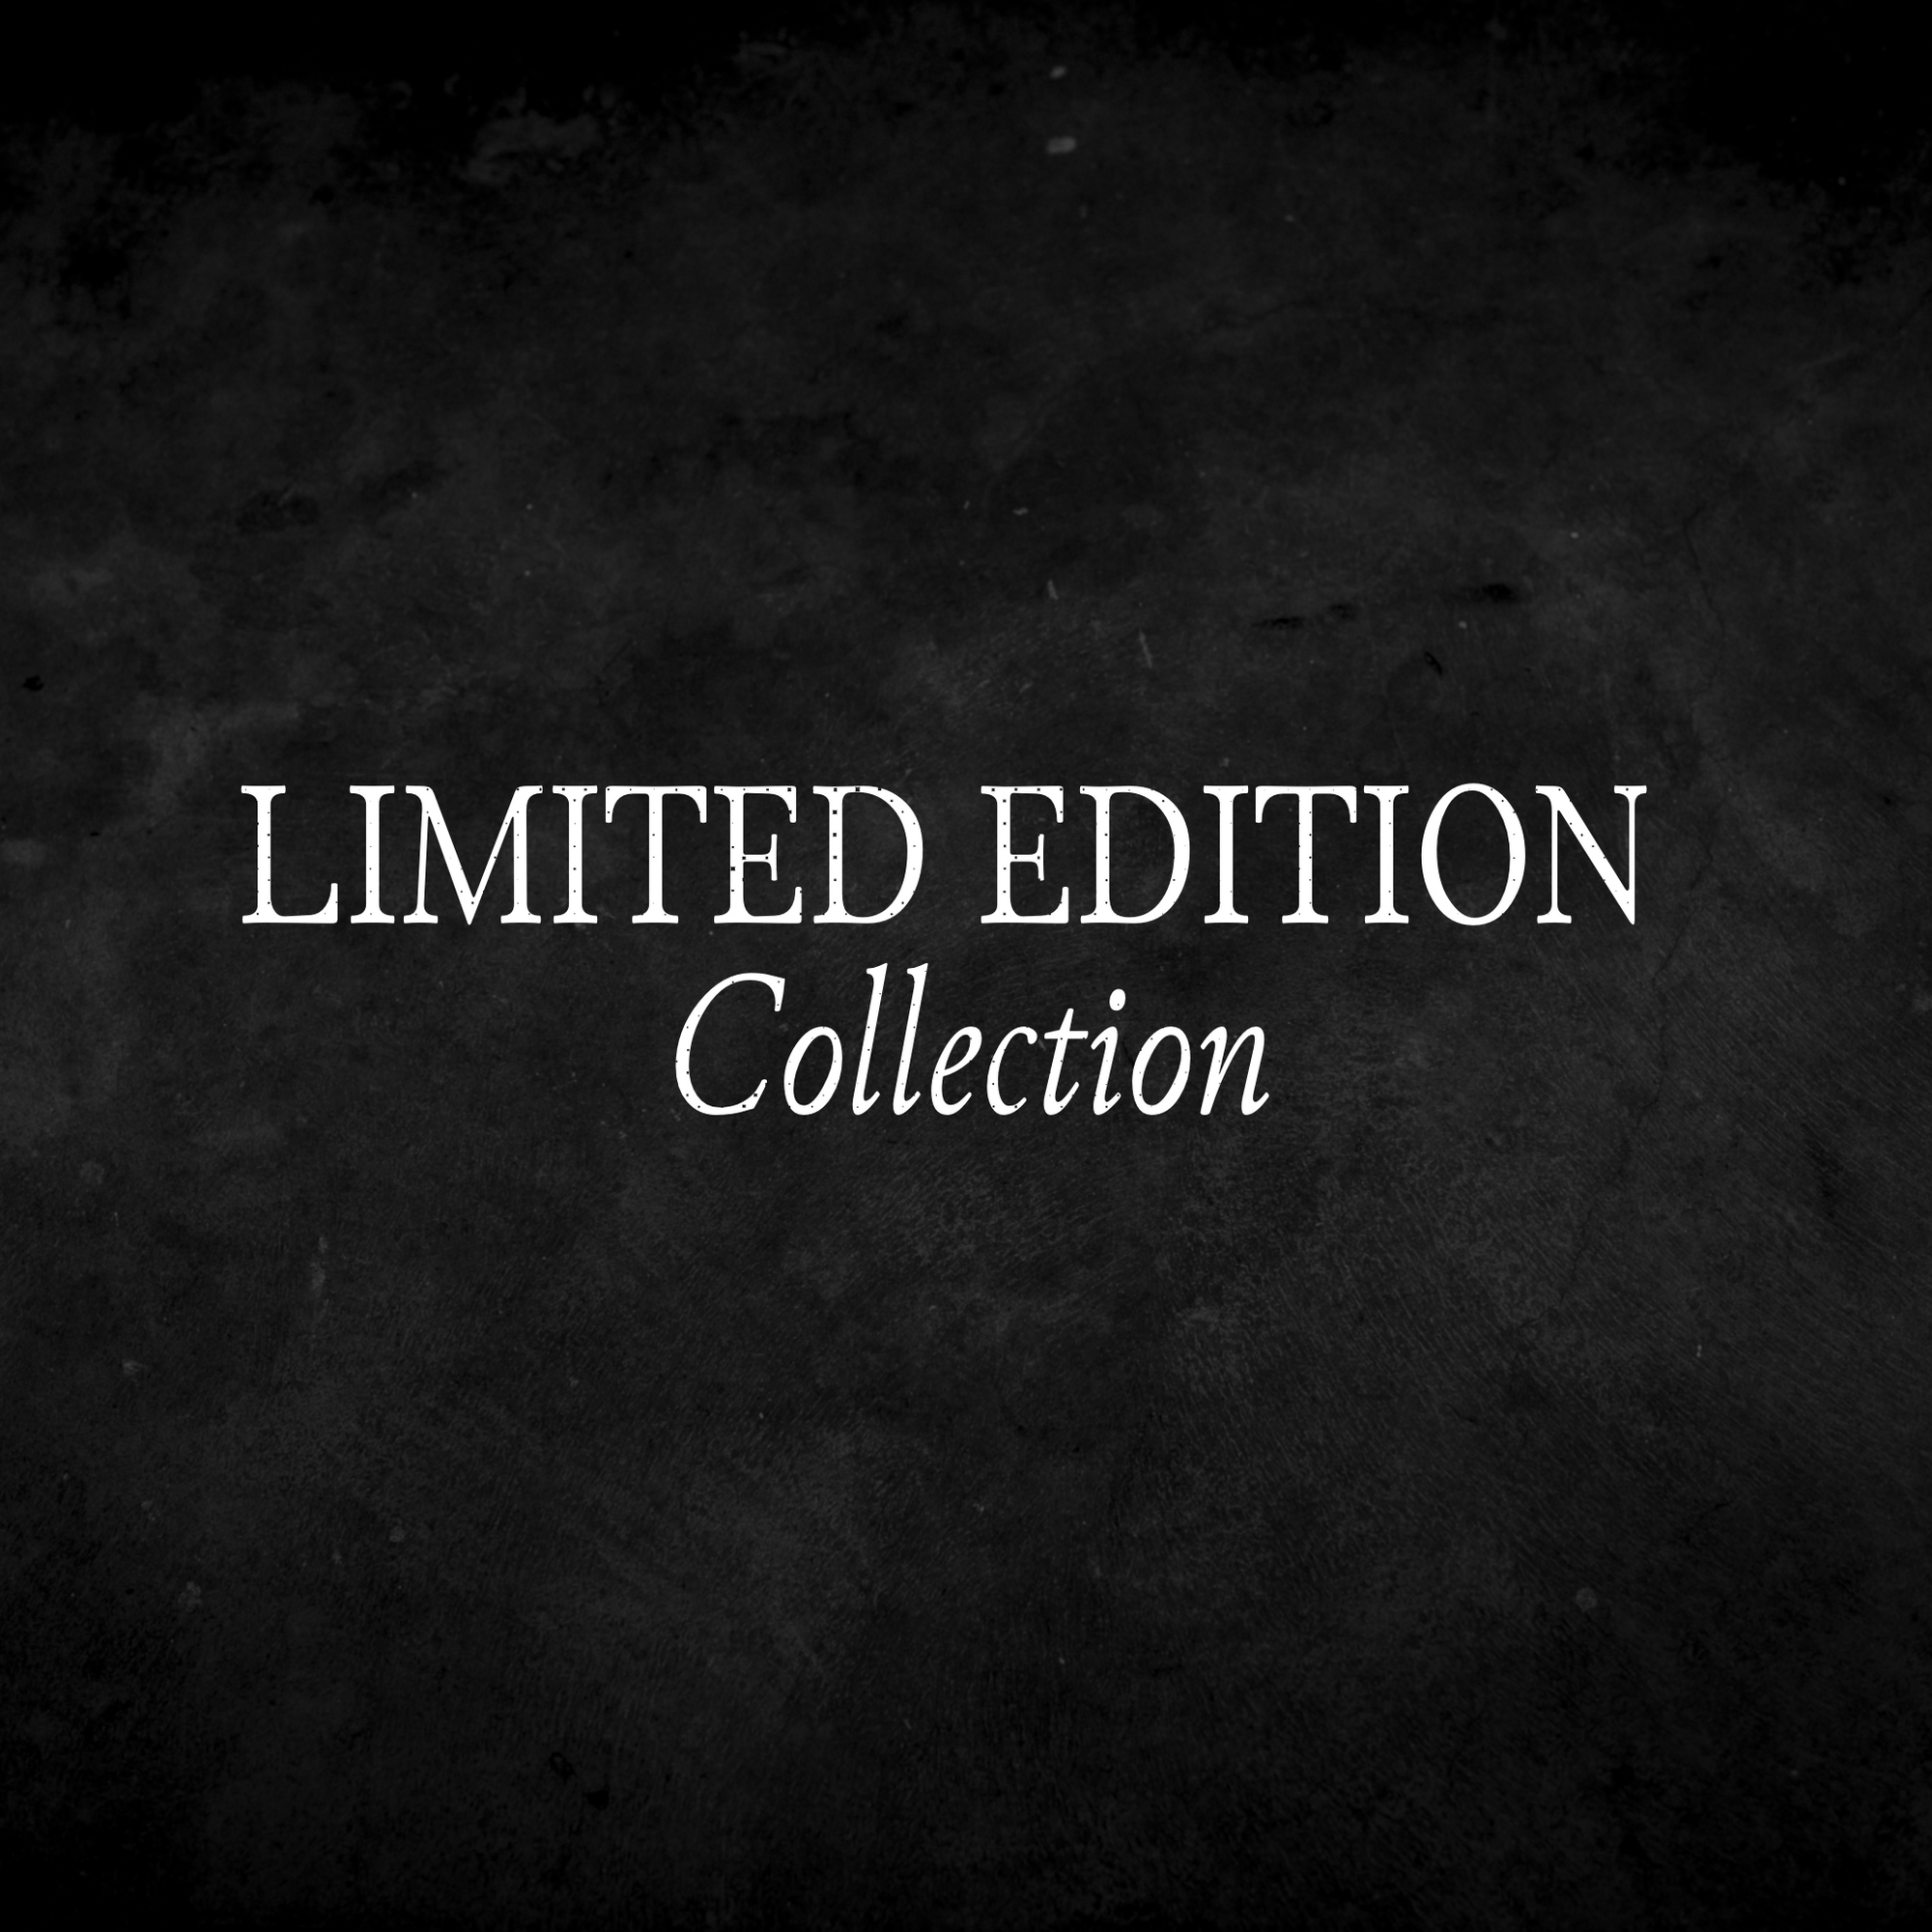 The Limited Edition Collection